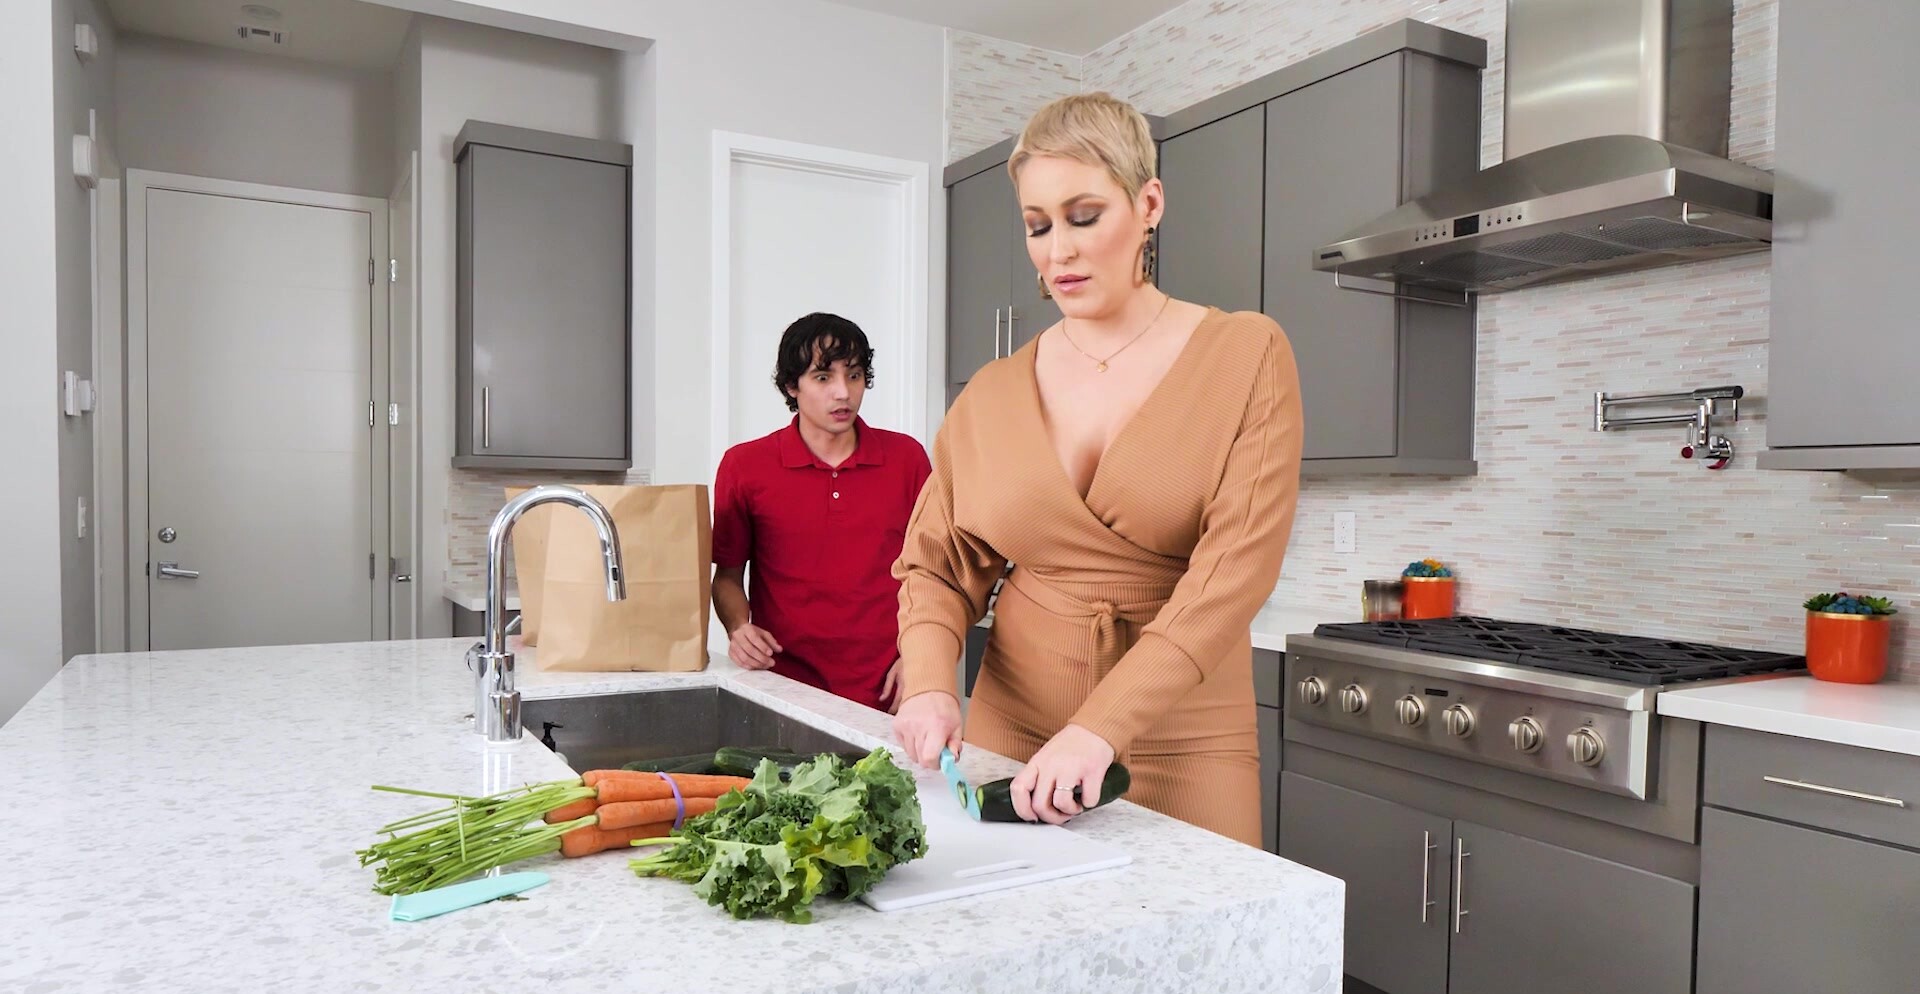 Restless porn in the kitchen for the big ass stepmom image